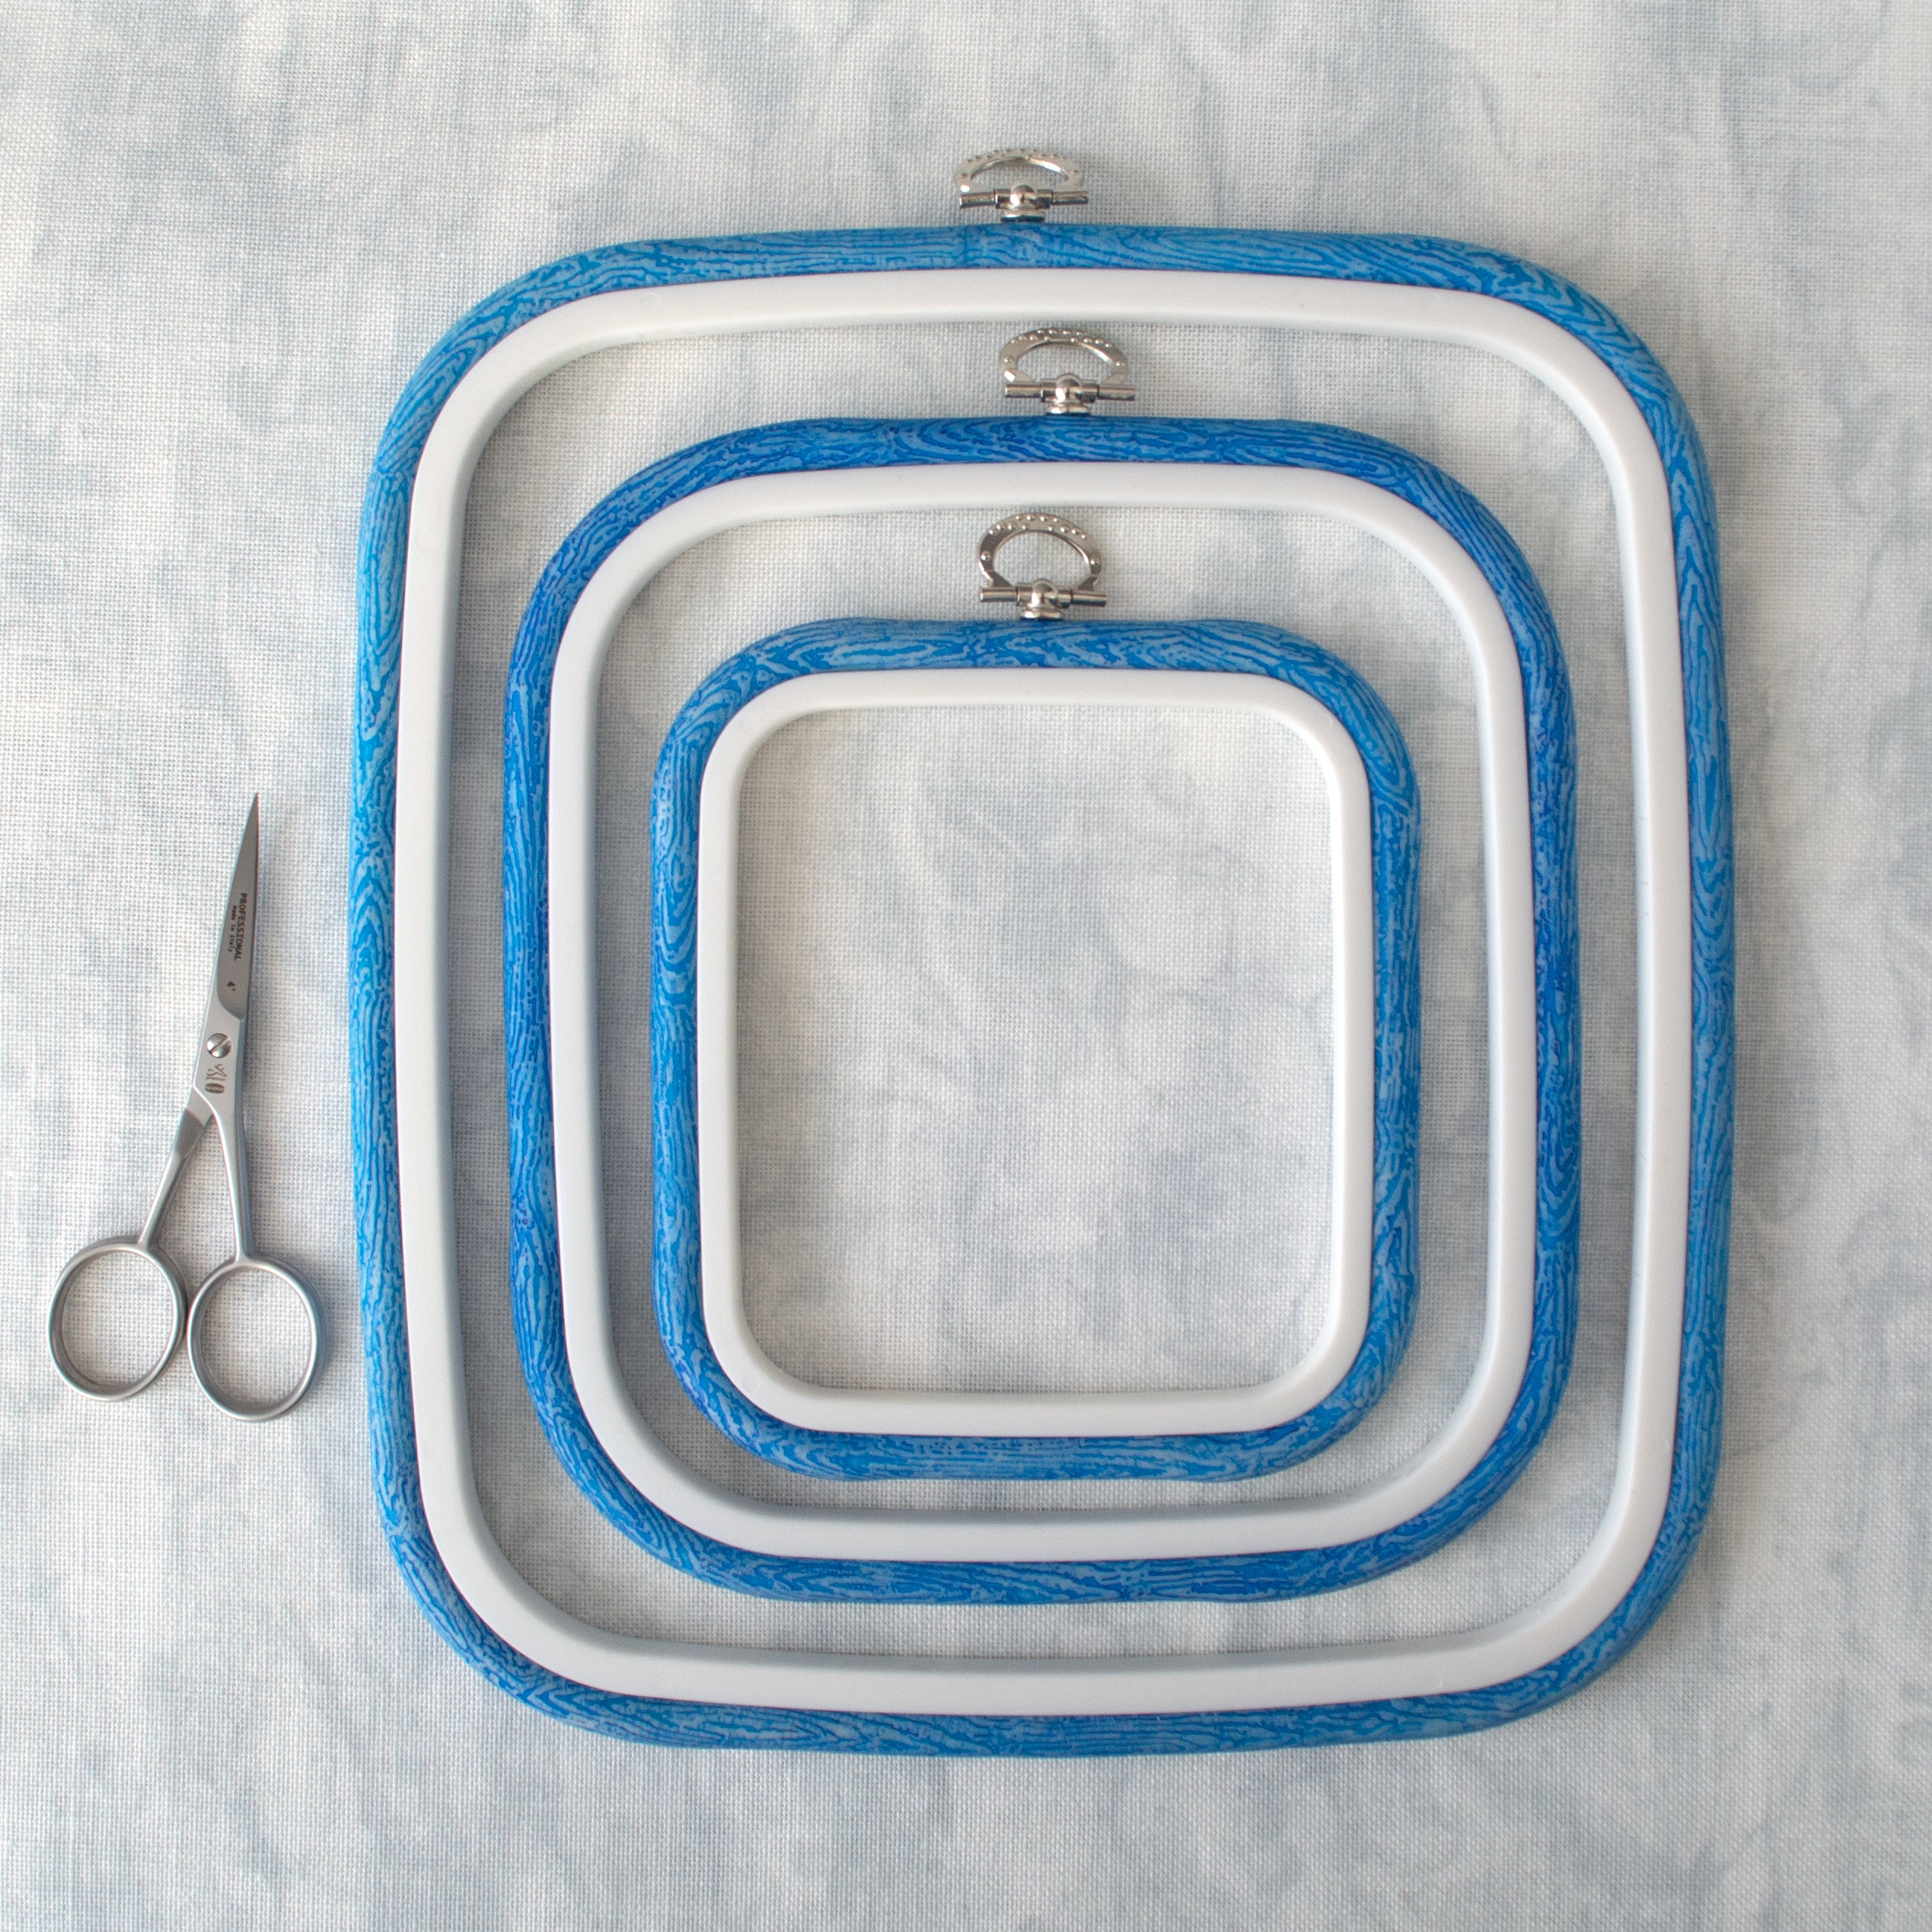 Nurge Flexi Hoop Square Frame-Frame Available in 4 Colors and 3 Sizes